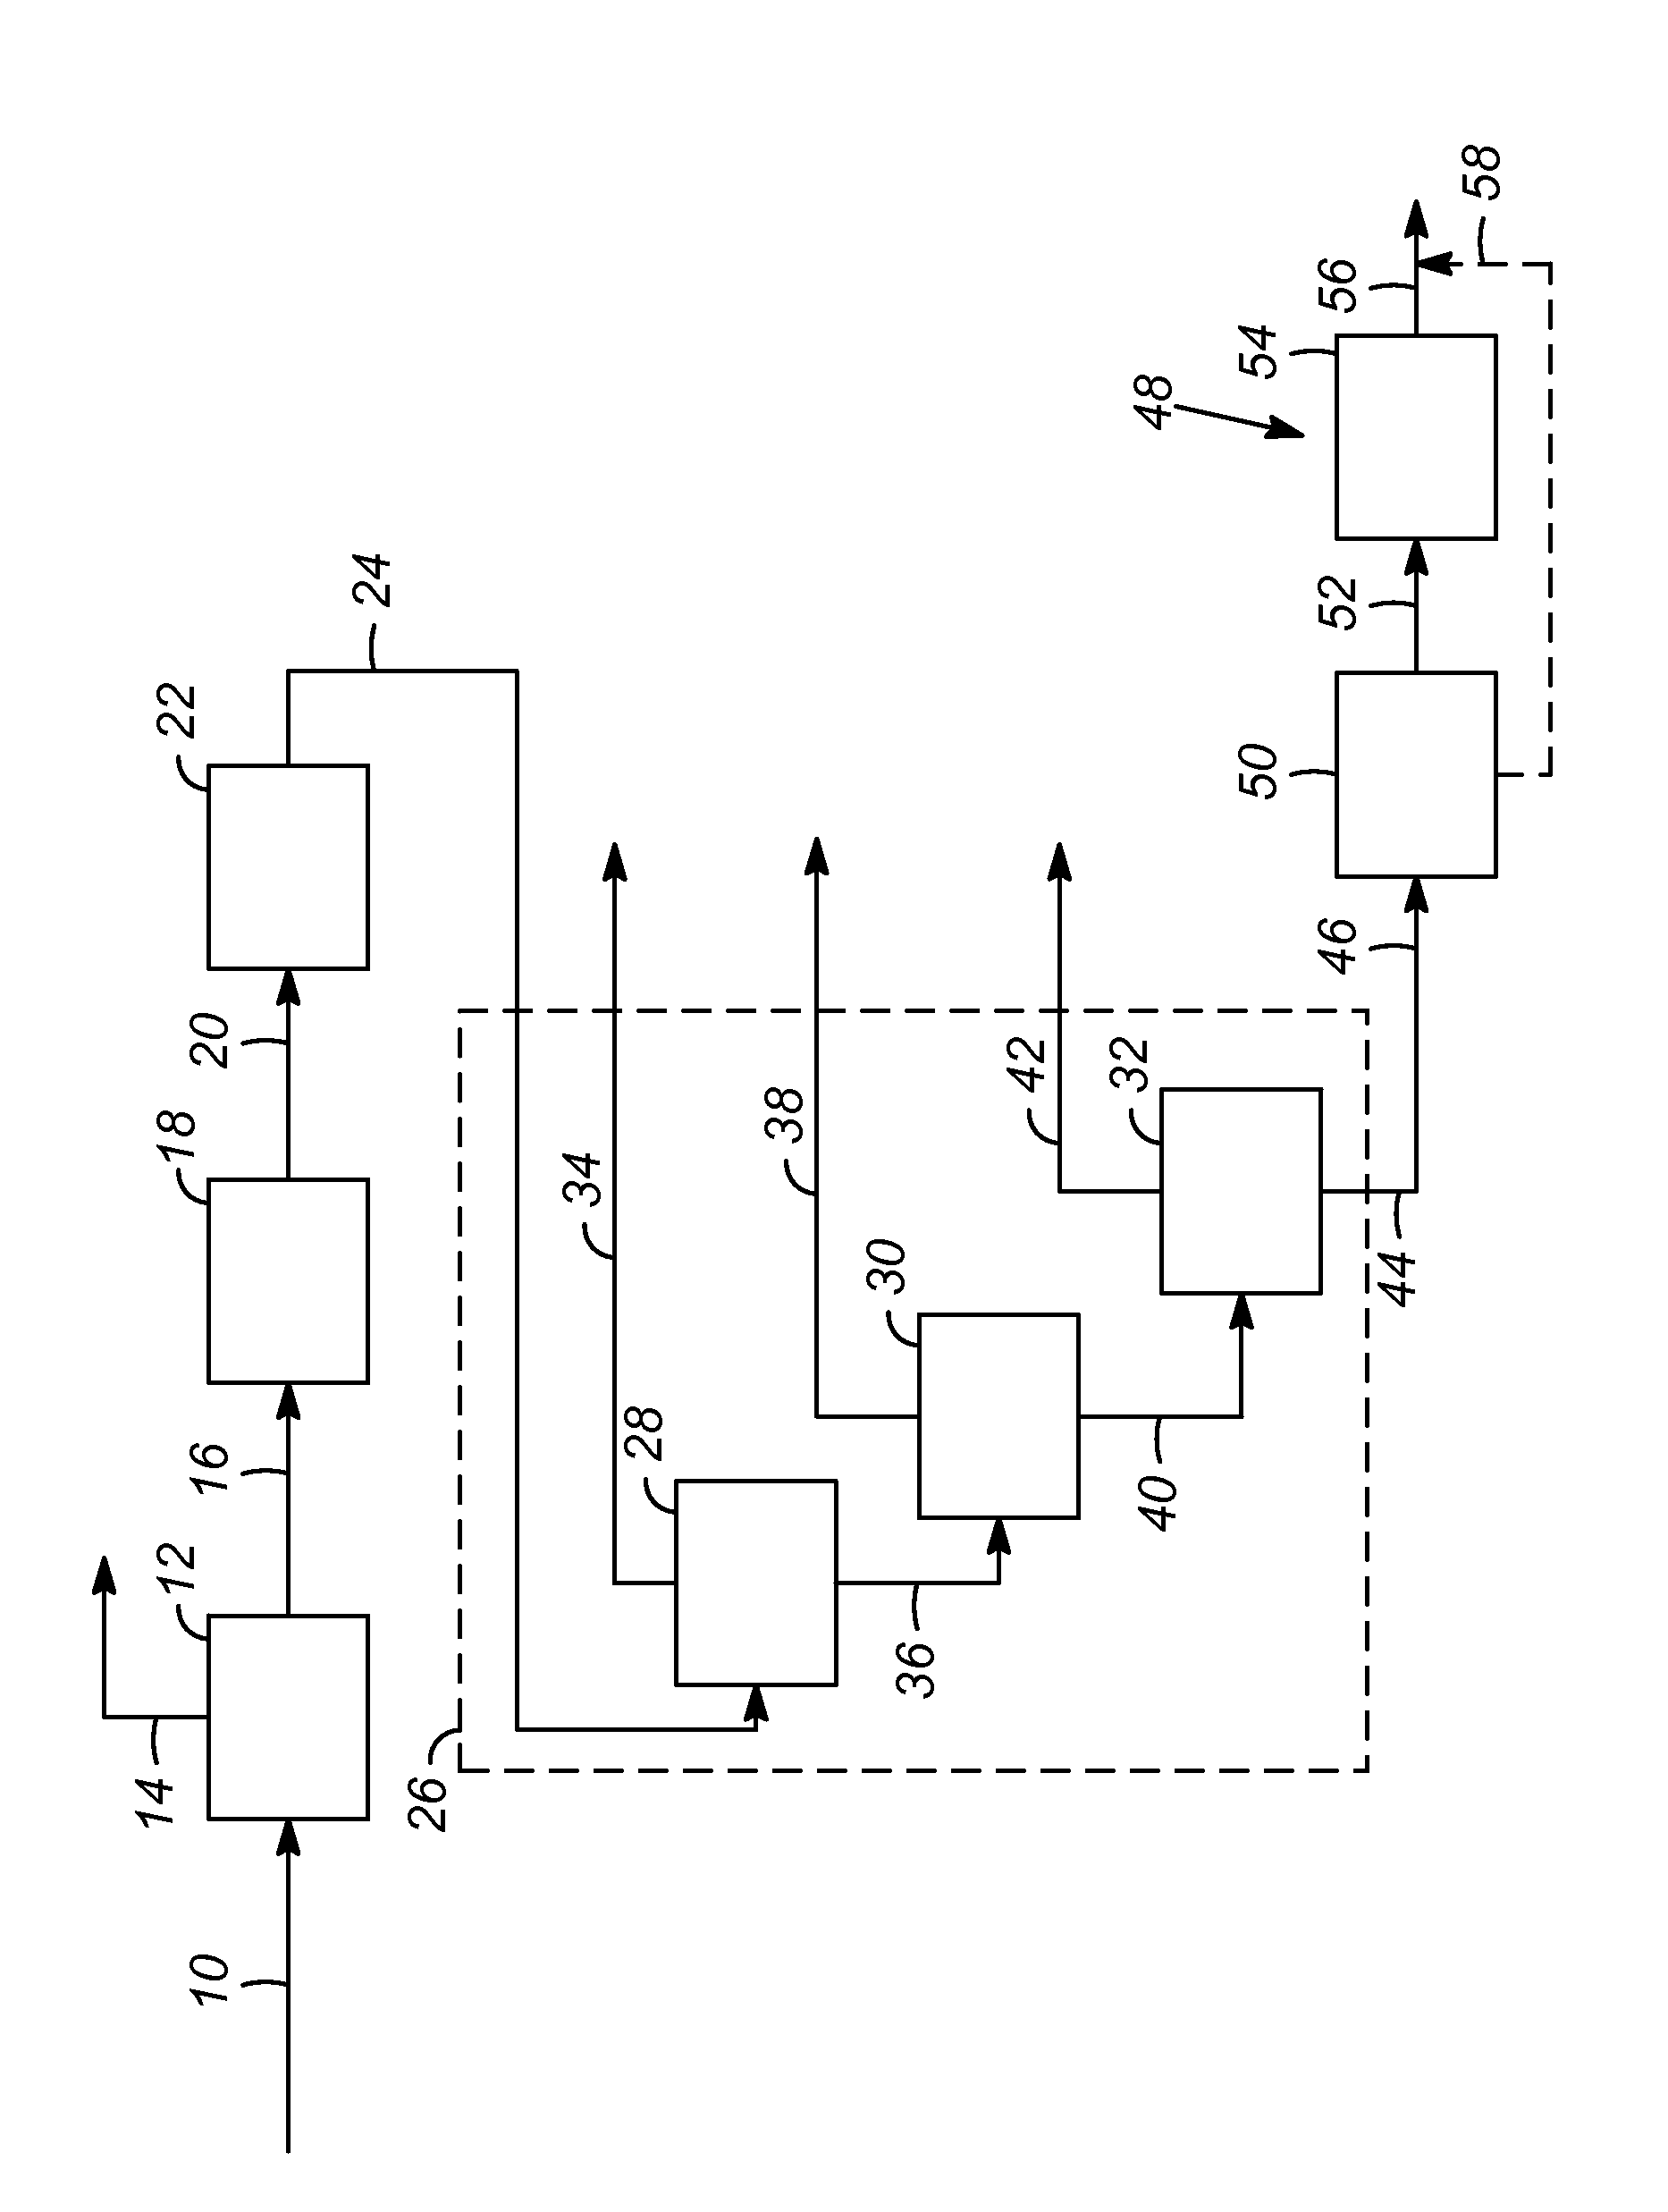 Process for producing a sweetened hydrocarbon stream